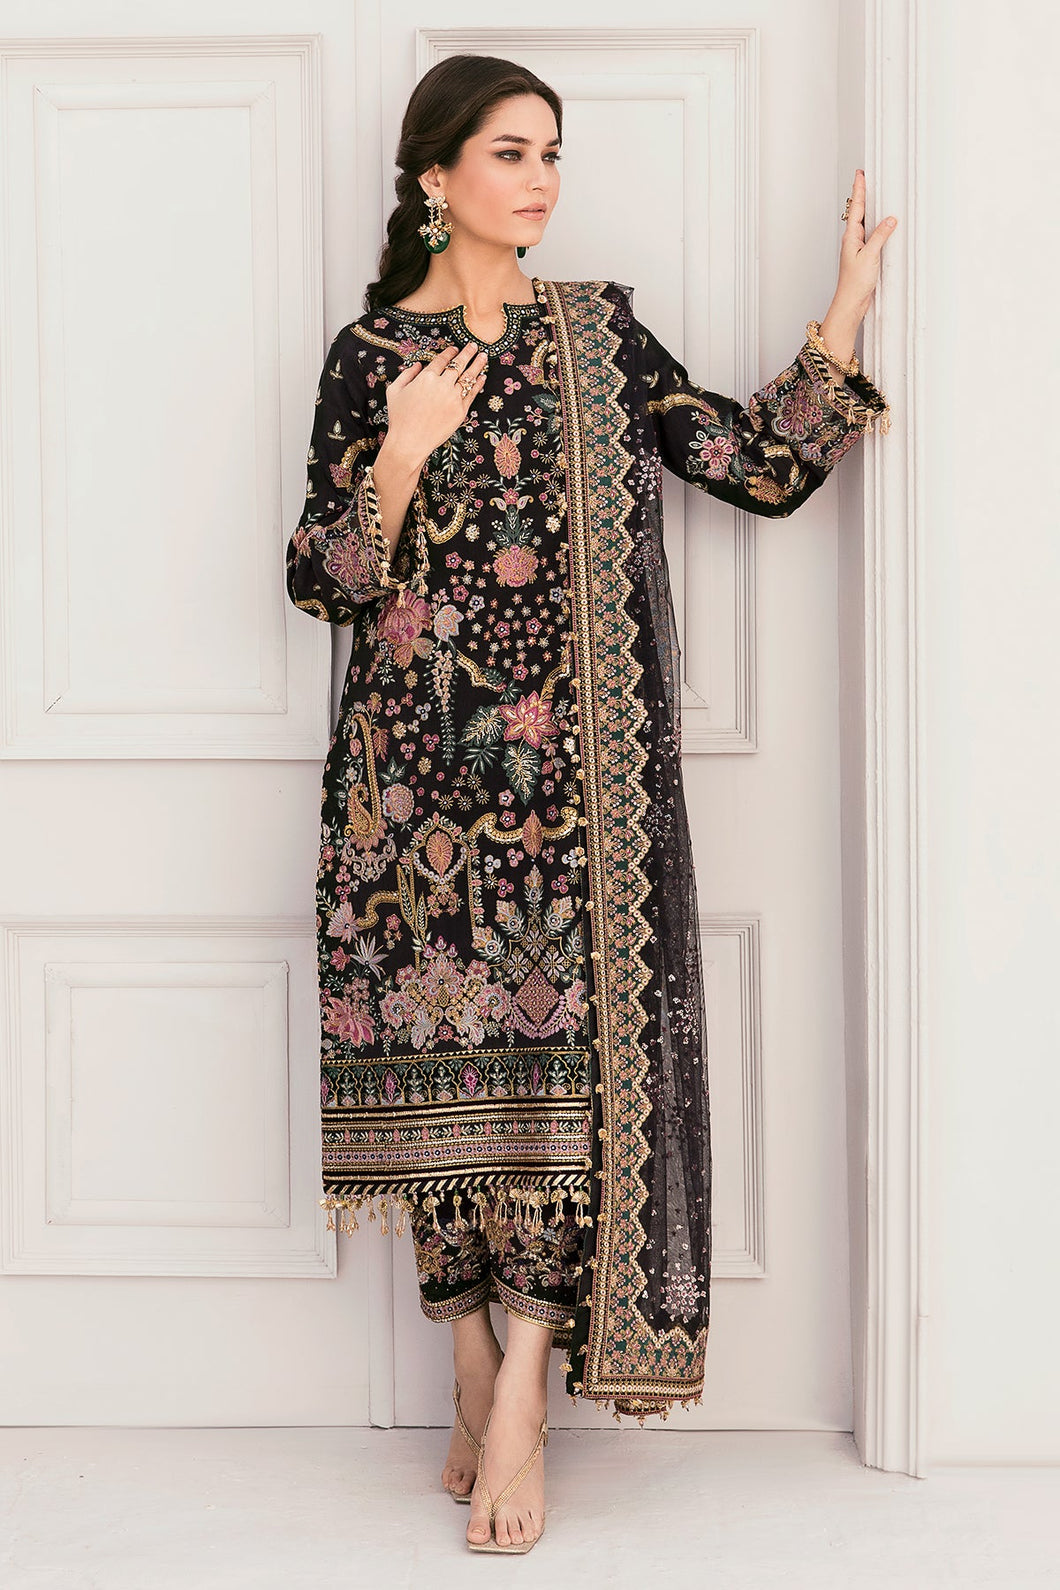 Buy BAROQUE CHANTELLE '22 | black color available in Next day shipping @Lebaasonline. We are the Largest Baroque Designer Suits in London UK with shipping worldwide including UK, Canada, Norway, USA. The Pakistani Wedding Chiffon Suits USA can be customized. Buy Baroque Suits online in Germany on SALE!